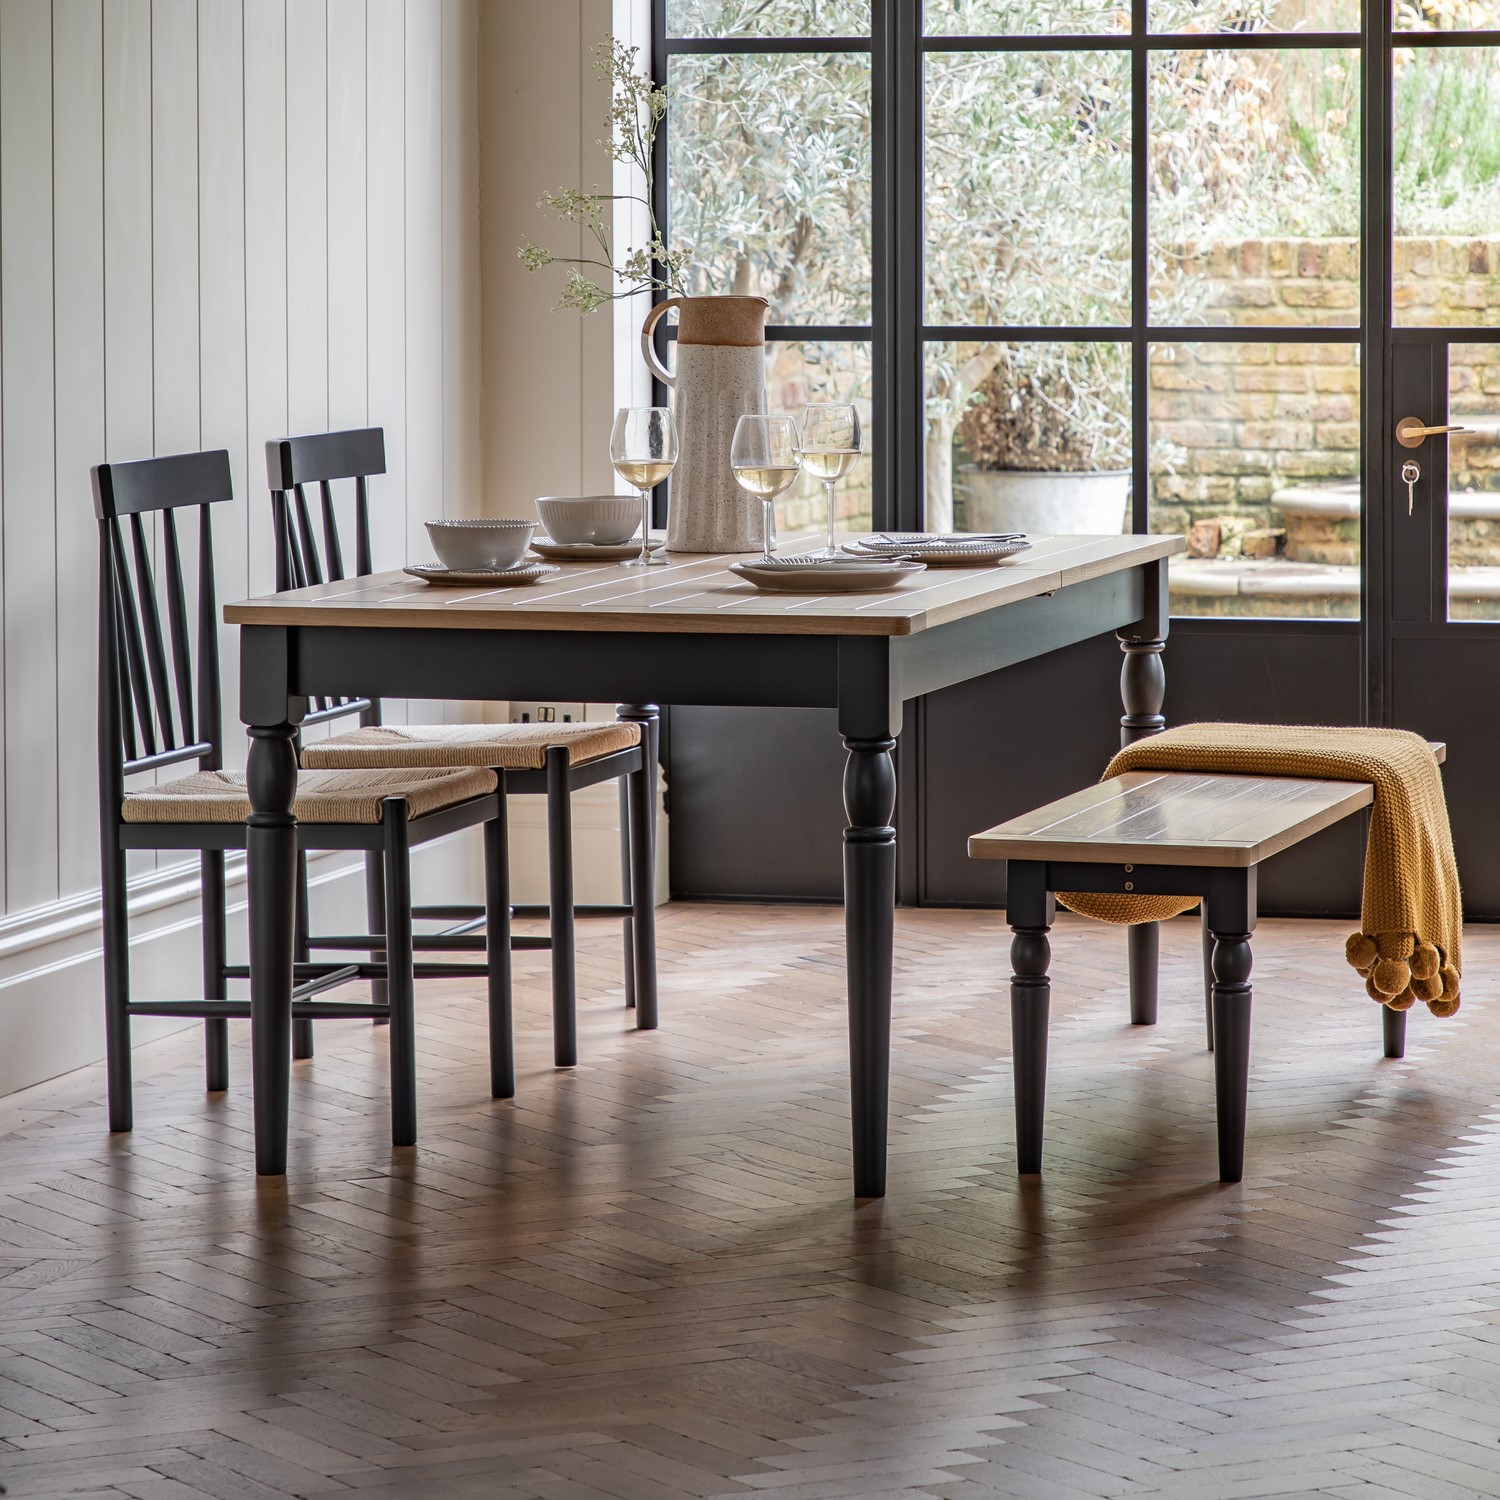 Read more about Eton extendable dining table navy seats 10- caspian house